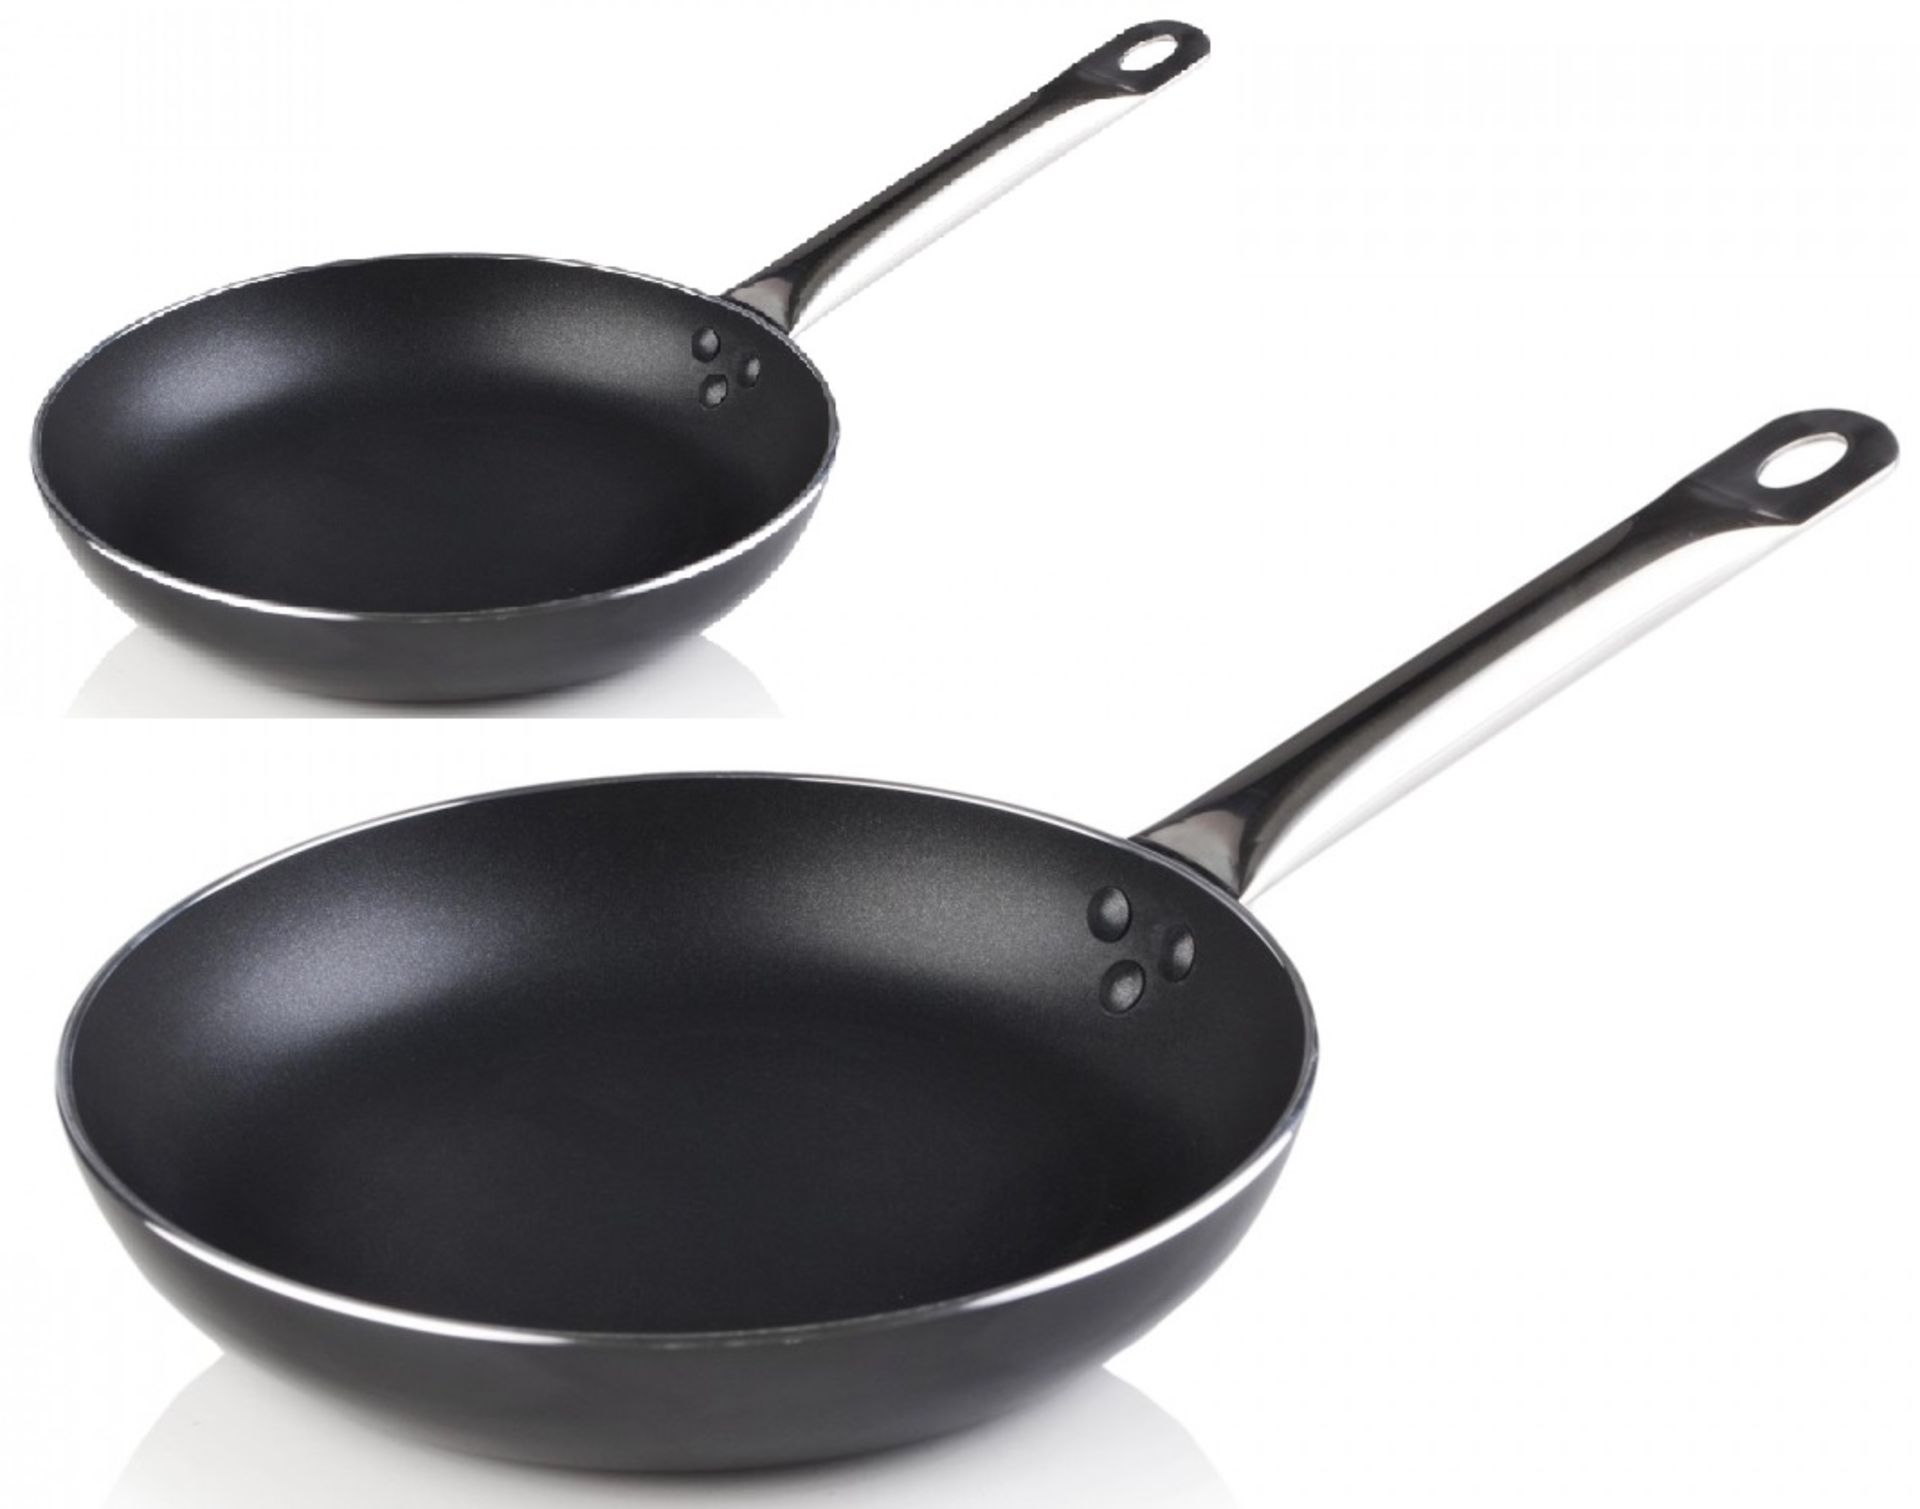 V *TRADE QTY* Brand New Set Of Two Professional Quality Induction Non-Stick Saute/Frying Pans - 20